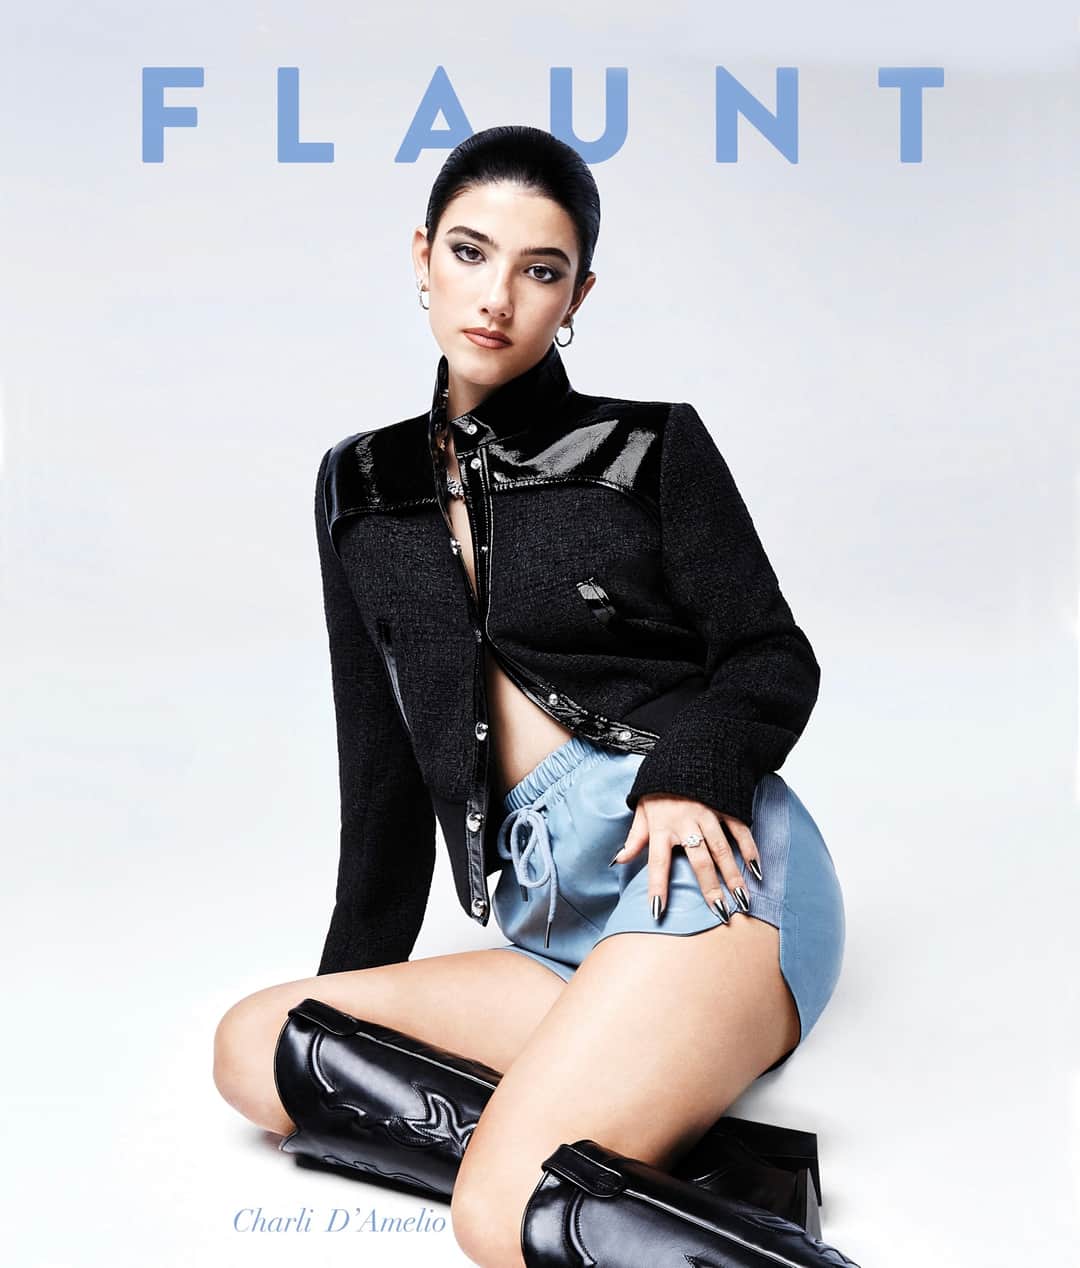 Flaunt Magazineさんのインスタグラム写真 - (Flaunt MagazineInstagram)「@CharliDamelio featuring @MajeParis for Issue 188, Eternal Flame! ​​​​​​​​ ​​​​​​​​ In the four years it took to reach internet superstardom, Charli D’Amelio’s rise has eclipsed far beyond what she could have daydreamed. From breaking follower records on @TikTok, starring in @Hulu’s show @DameliosOnHulu, being the face of @DamelioFootwear, @SocialTourist, @BornDreamerByCD to winning @DancingWithTheStars, the 19-year-old still ponders what she’s going to do with the rest of her life. ​​​​​​​​ ​​​​​​​​ Reflecting on her achievements, Charli says, “I think Dancing with the Stars was definitely one of the biggest accomplishments on so many levels: to prove to everyone, but also to myself, what I can do. I put in the work to make this happen and it wasn’t something that anyone could take away from me. It was the most physically and mentally exhausting thing I think I’ve ever done.” ​​​​​​​​ ​​​​​​​​ Read the full feature on flaunt.com! ​​​​​​​​ ​​​​​​​​ Charli wears @MajeParis jacket, shorts, and boots and @TheOfficialPandora earrings, necklace, and ring.​​​​​​​​ ​​​​​​​​ Photographed by @FabienMontique​​​​​​​​ Styled by @MuiHai​​​​​​​​ Written by @BeatriceHazlehurst​​​​​​​​ Hair: @MarandaHair @HomeAgency​​​​​​​​ Makeup: @Loftjet at @ForwardArtists​​​​​​​​ Nails: @Nails_of_LA​​​​​​​​ Retouching: @Sam.Retouch​​​​​​​​ Flaunt Film: @IsaacDektor​​​​​​​​ Photo Assistant: @Skoczkowski​​​​​​​​ Styling Assistants: @Chloe.Cussen, @DavidxGomez, and @Ry_Phung​​​​​​​​ Production Assistant: @Khamiiiii​​​​​​​​ Location: @HubbleStudio​​​​​​​​ ​​​​​​​​ #FlauntMagazine #TheEternalFlameIssue #CharliDamelio」9月13日 2時56分 - flauntmagazine